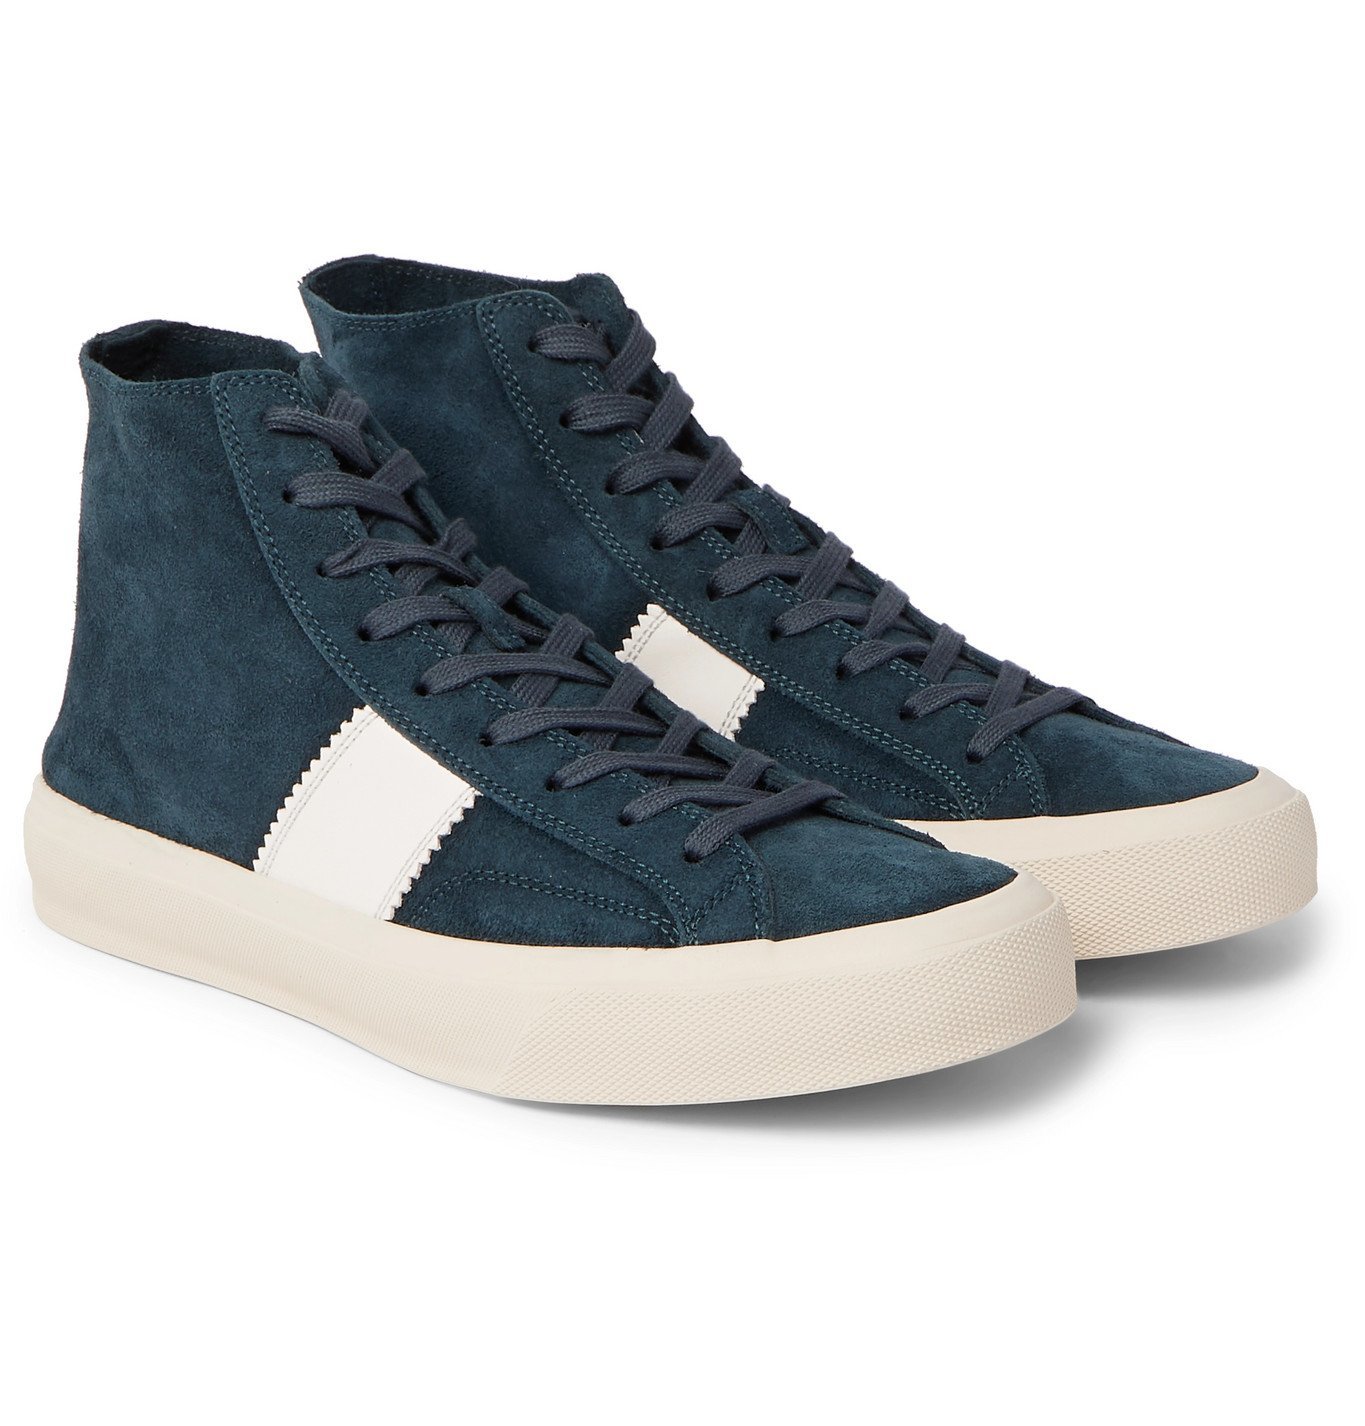 TOM FORD - Cambridge Leather-Trimmed Suede High Top Sneakers - Blue TOM ...